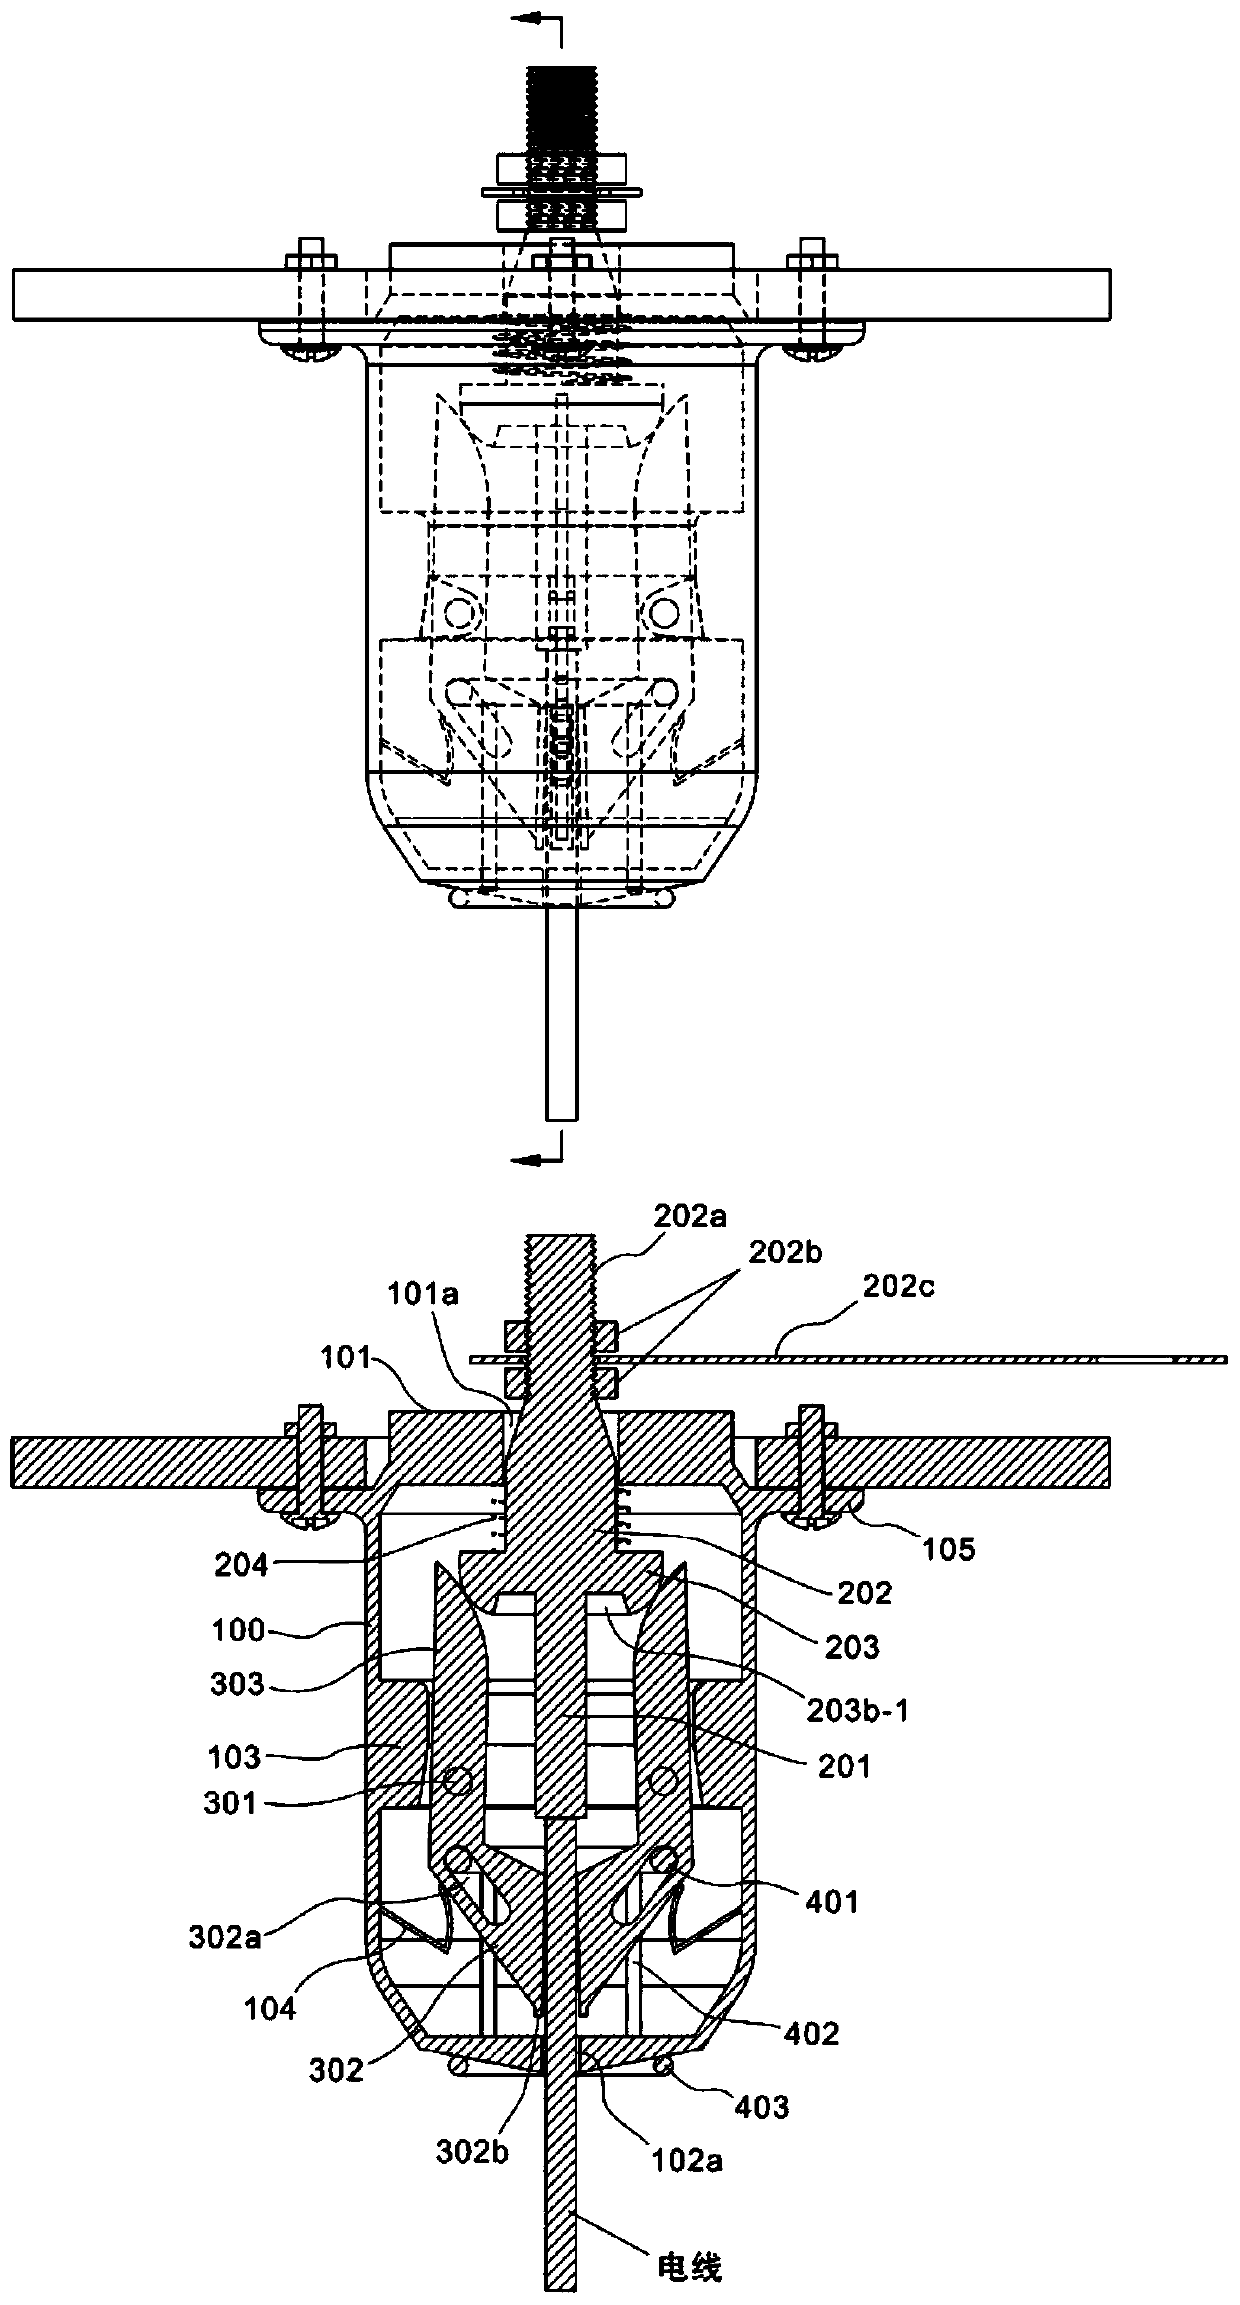 Binding post structure applicable to power distribution terminal detection